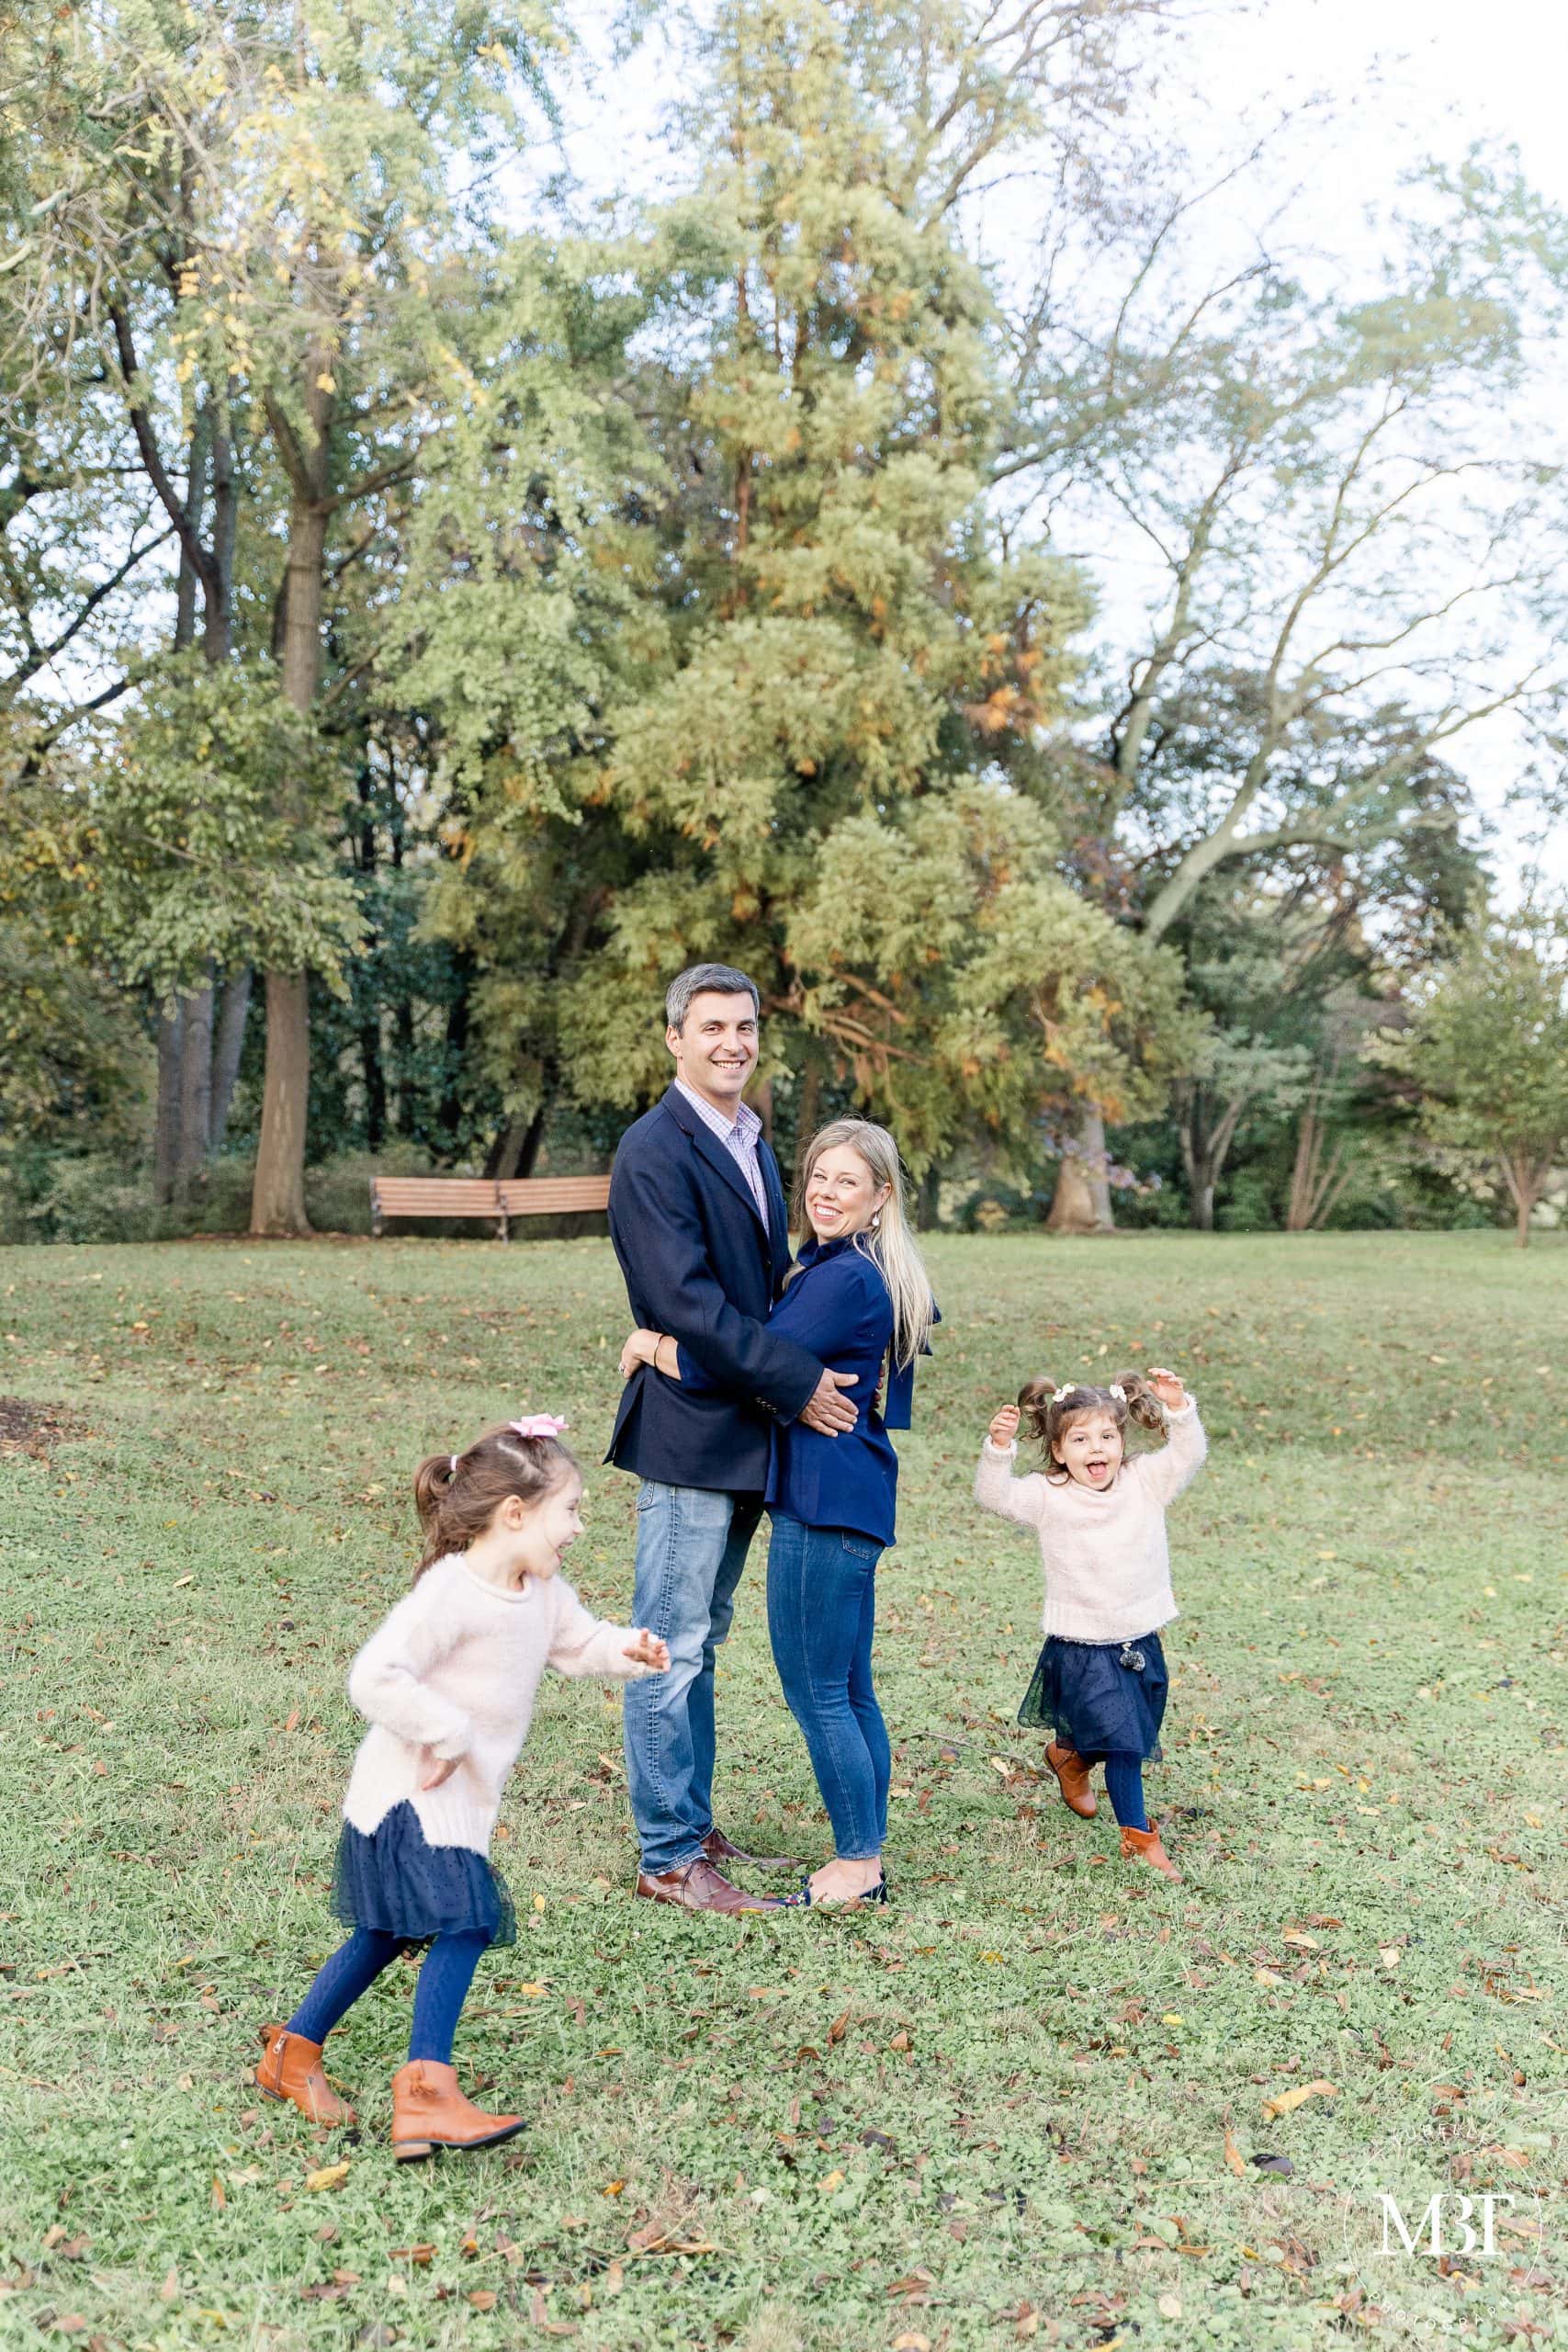 mom & dad hugging each other while the girls are running around in circle, taken in Falls Church - Virginia family photography